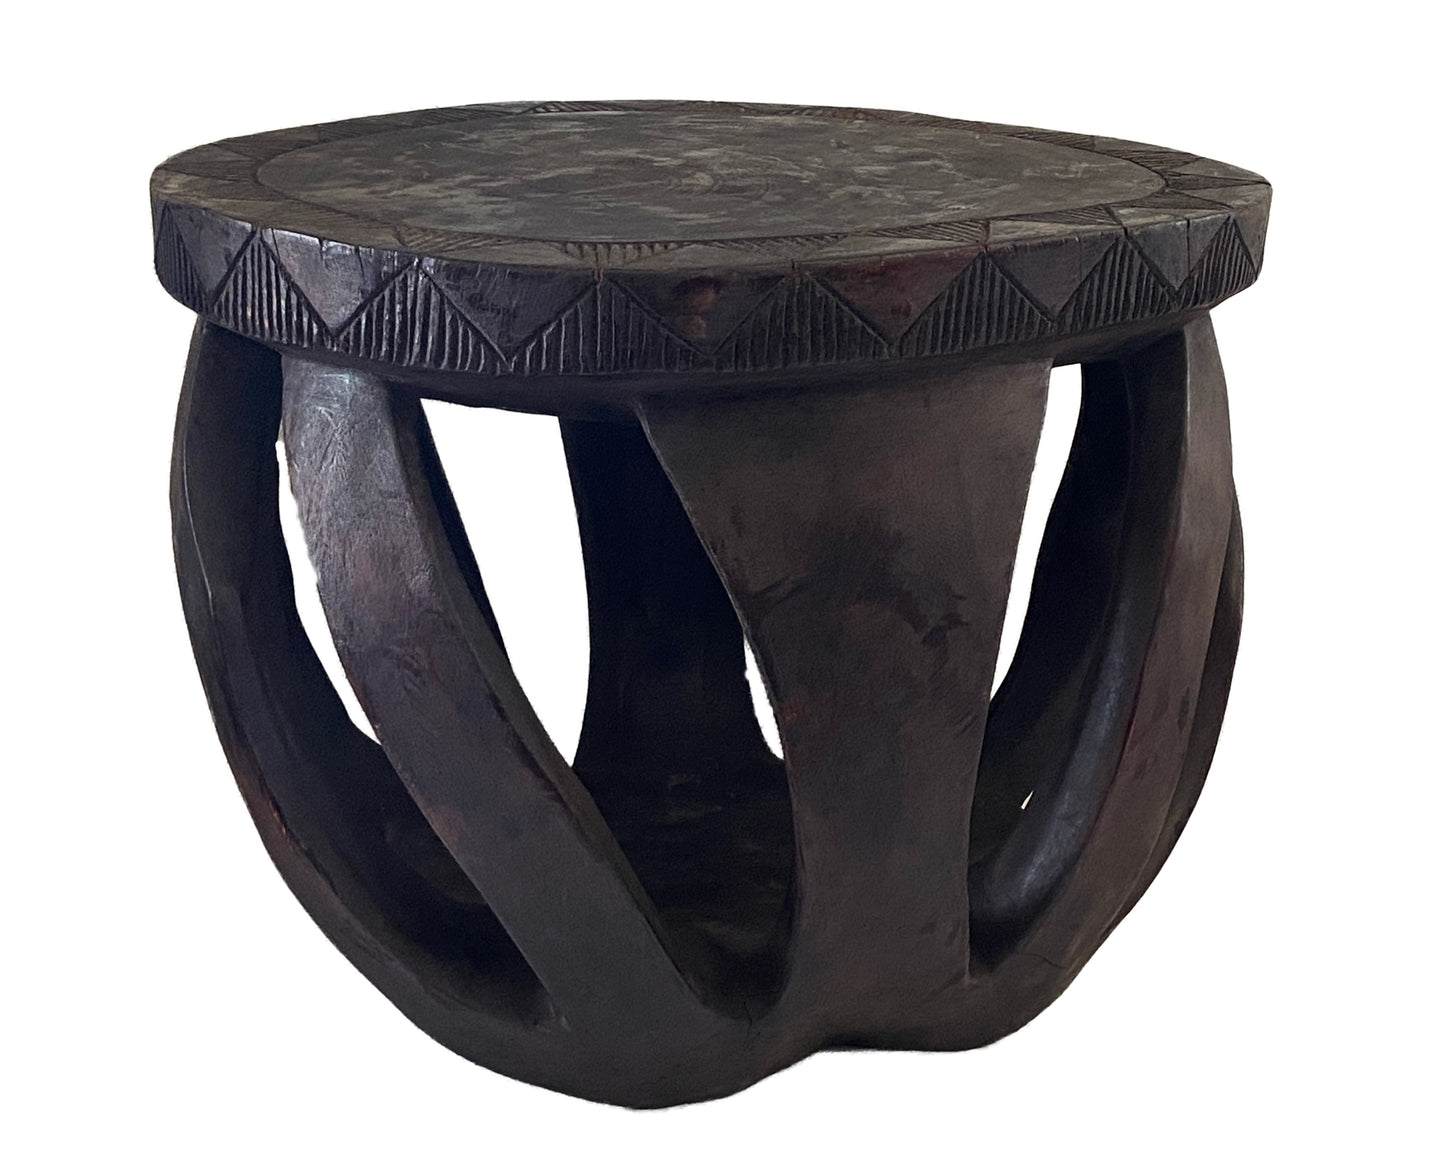 #3747 African  Baga LG Stool /Table Guinea-Bissau  14" H by 17.25"W